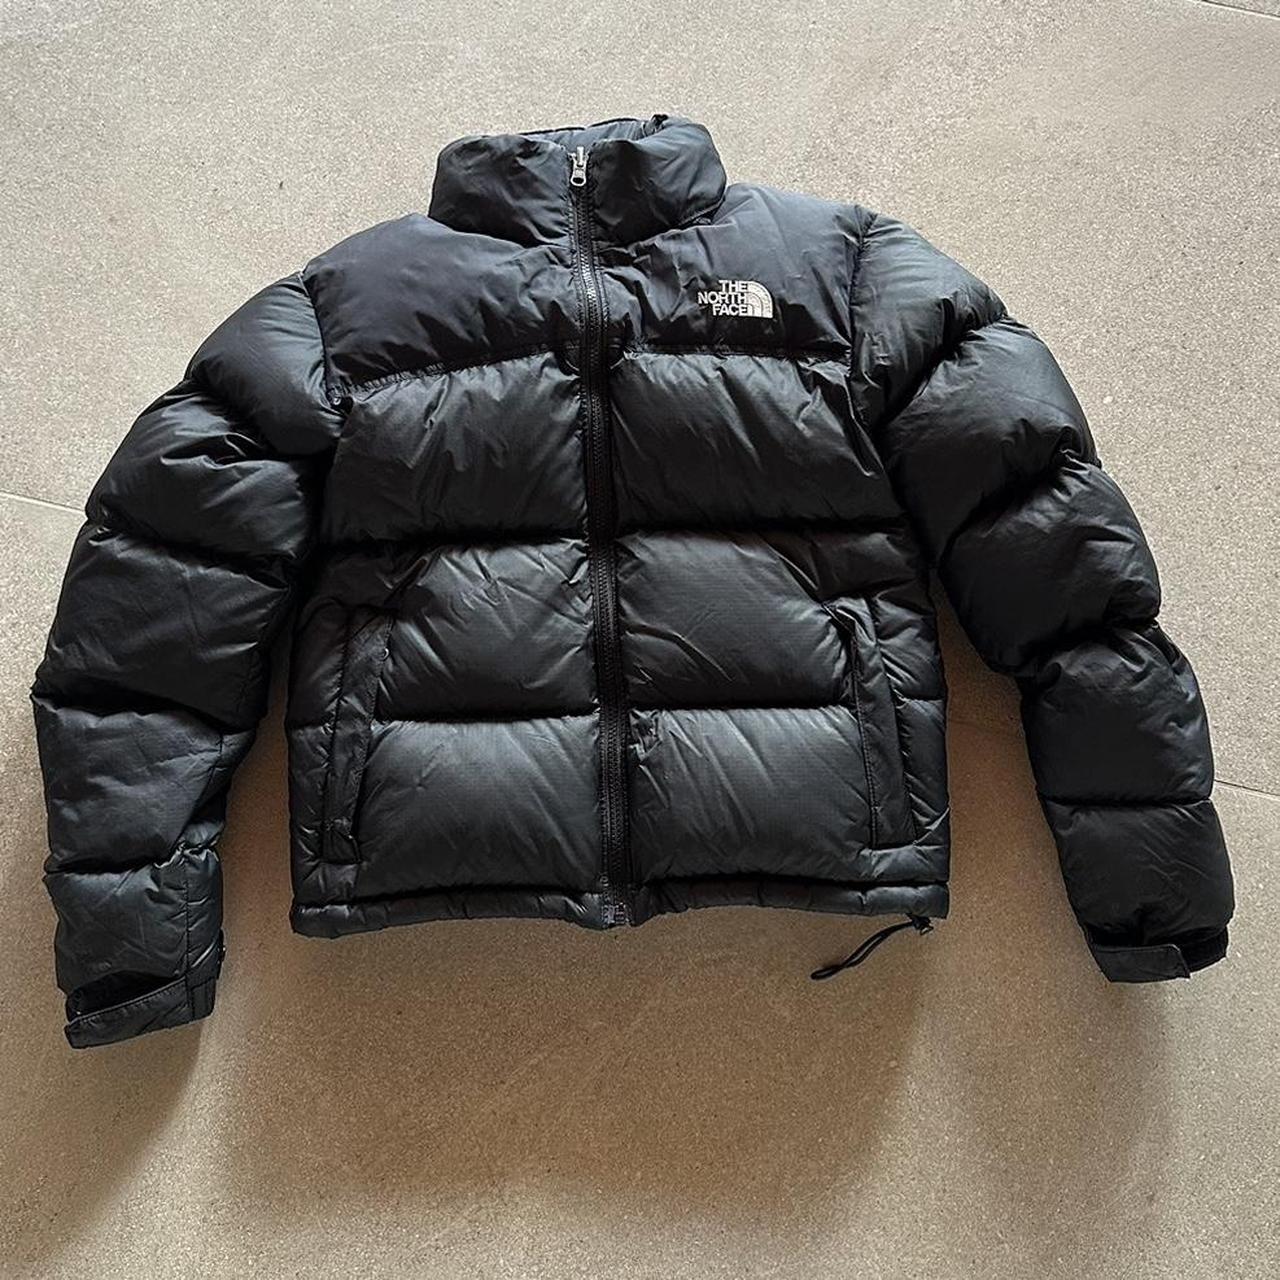 The North Face Women's Jacket | Depop